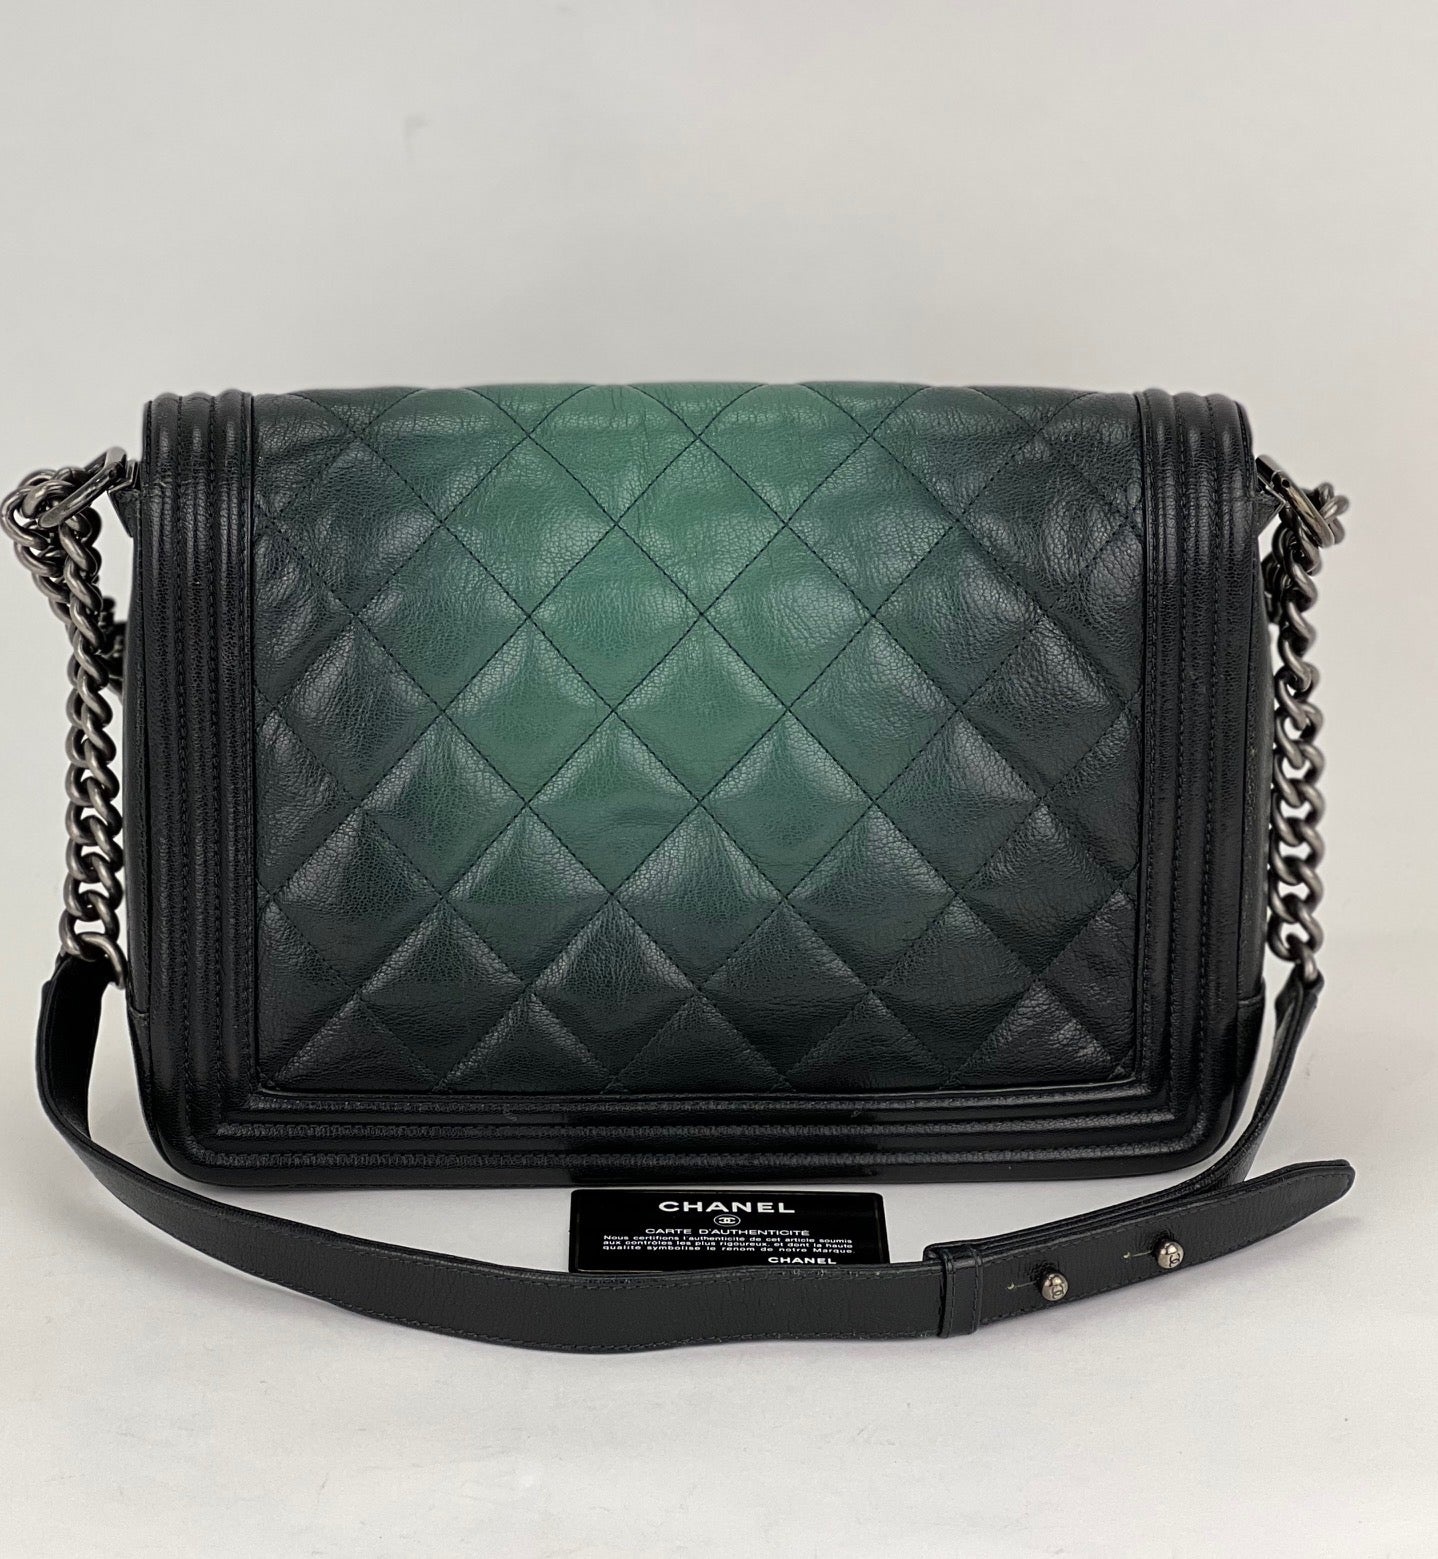 CHANEL Bag Dark Green Ombre Quilted Glazed Leather Large Boy Authentic preowned - 6